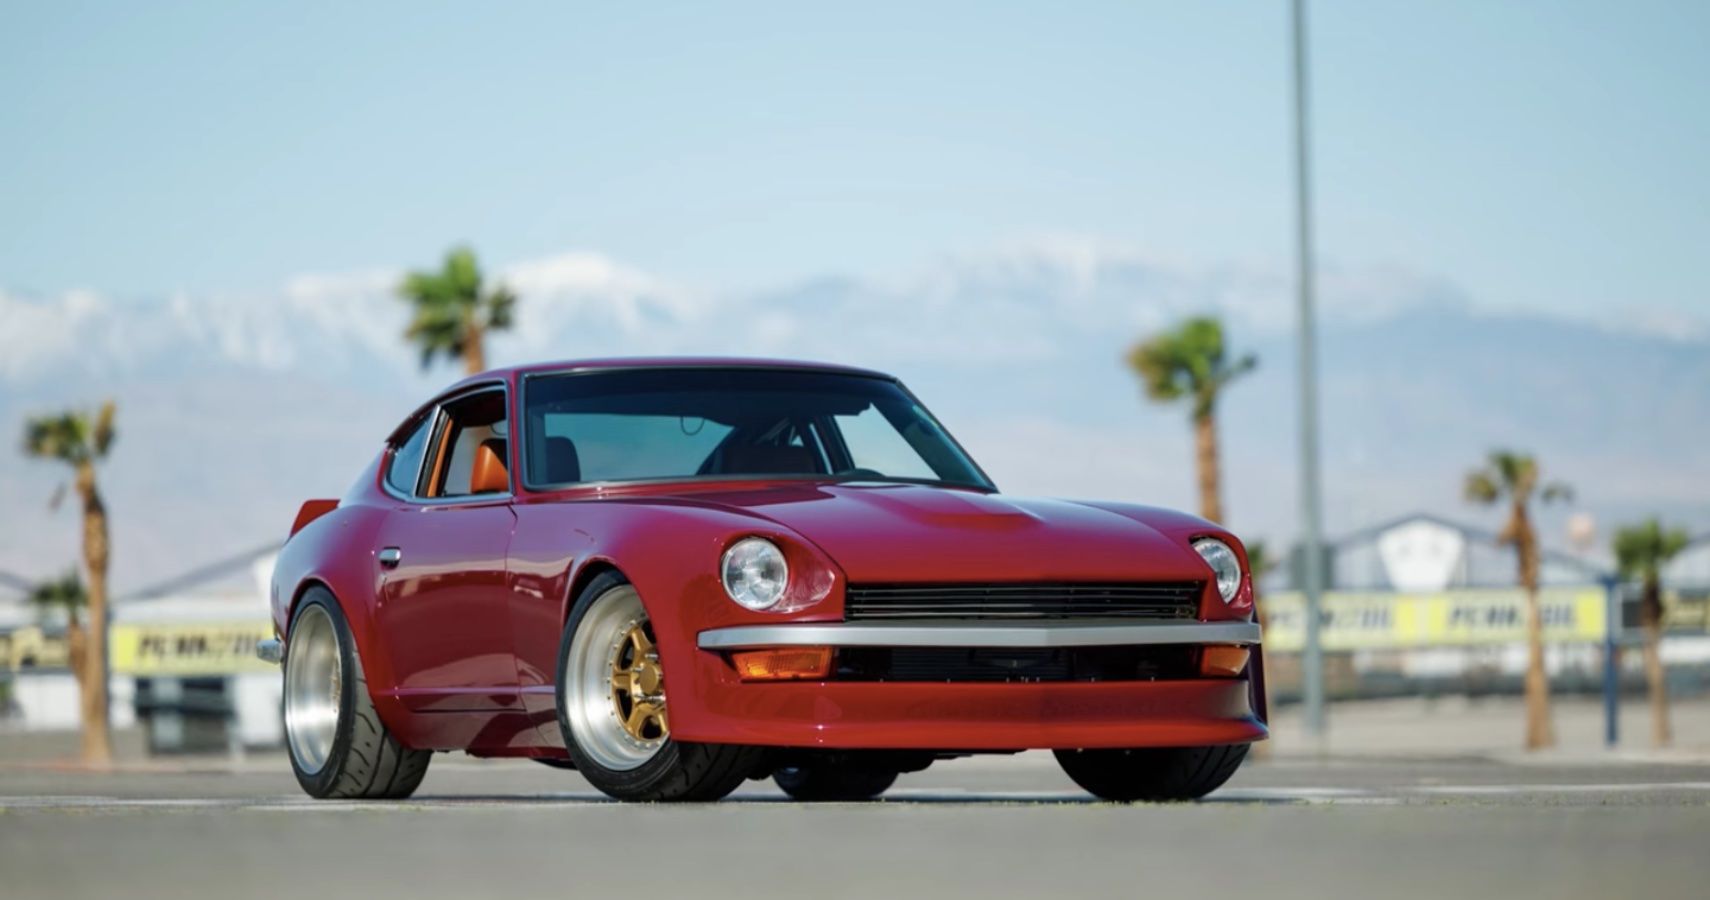 A restomod red Datsun 240Z with an LS V8 engine swap